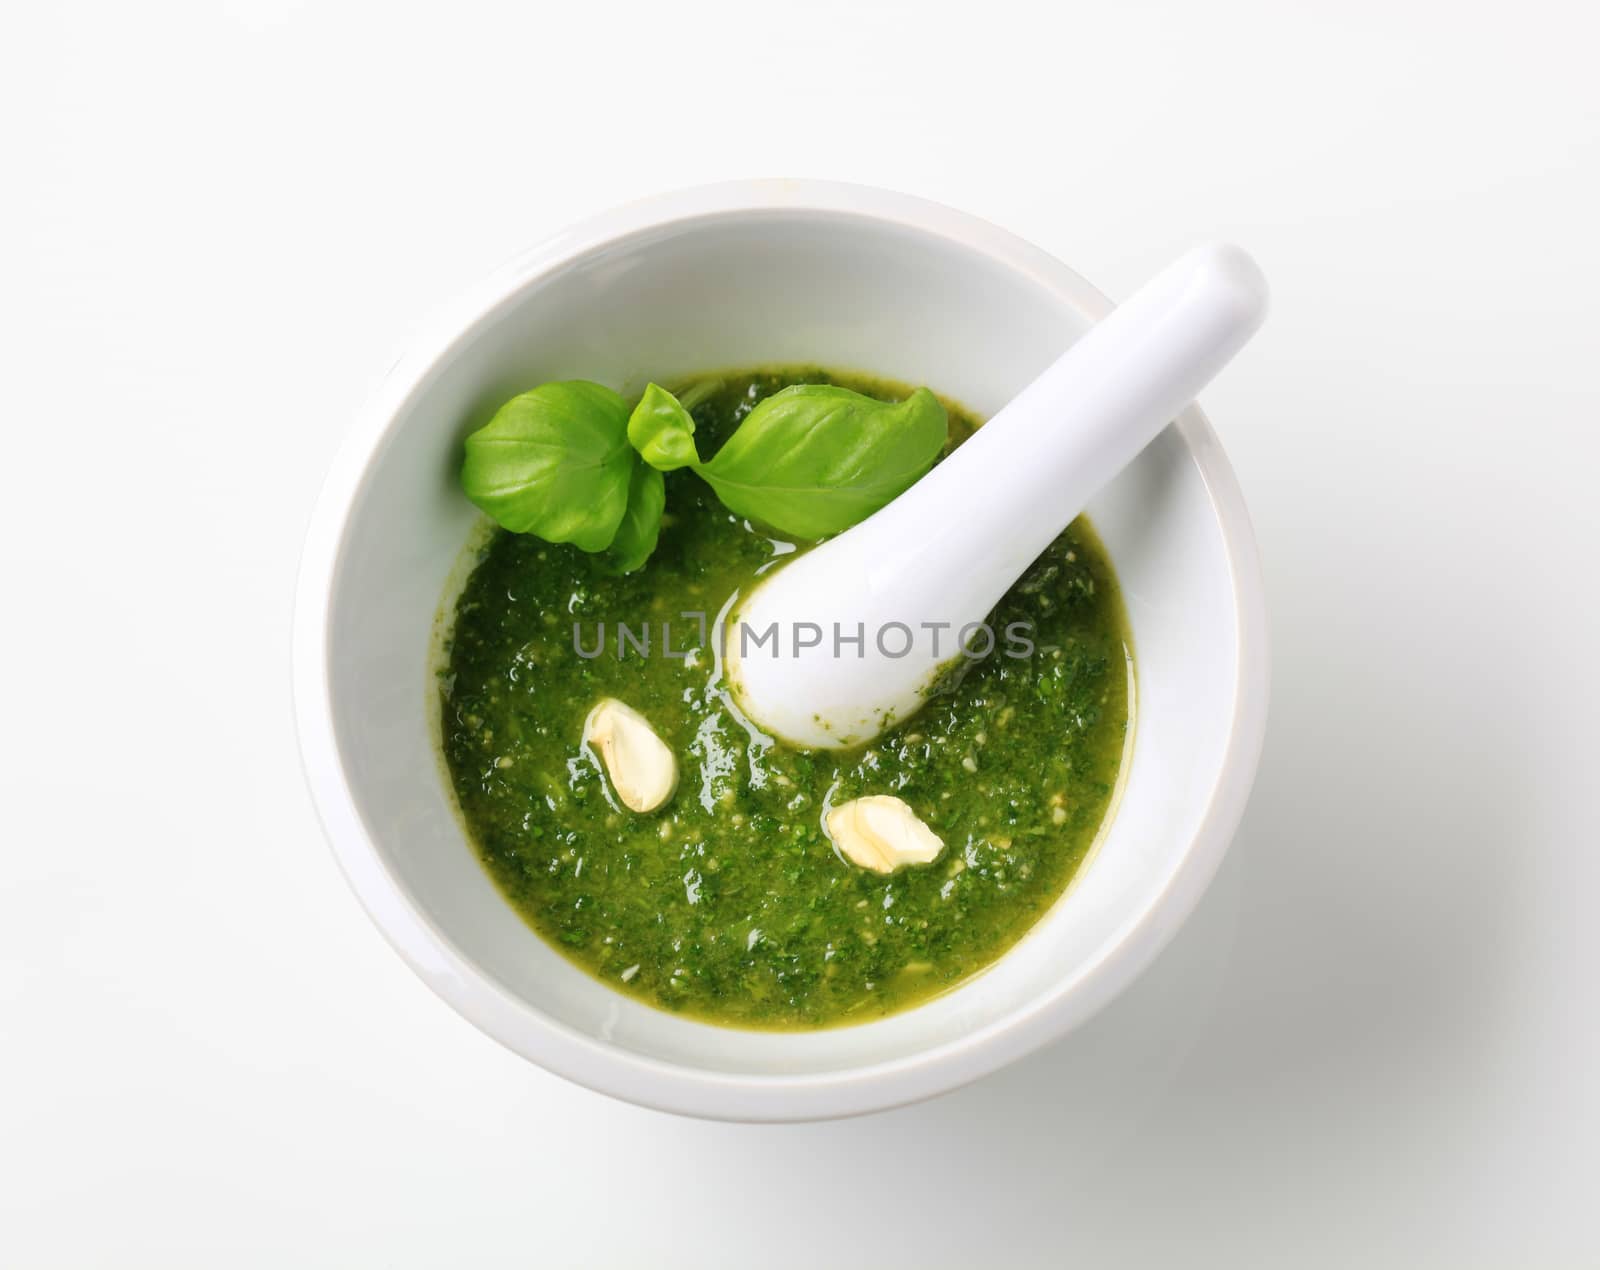 Basil pesto with crushed cashew nuts in a mortar